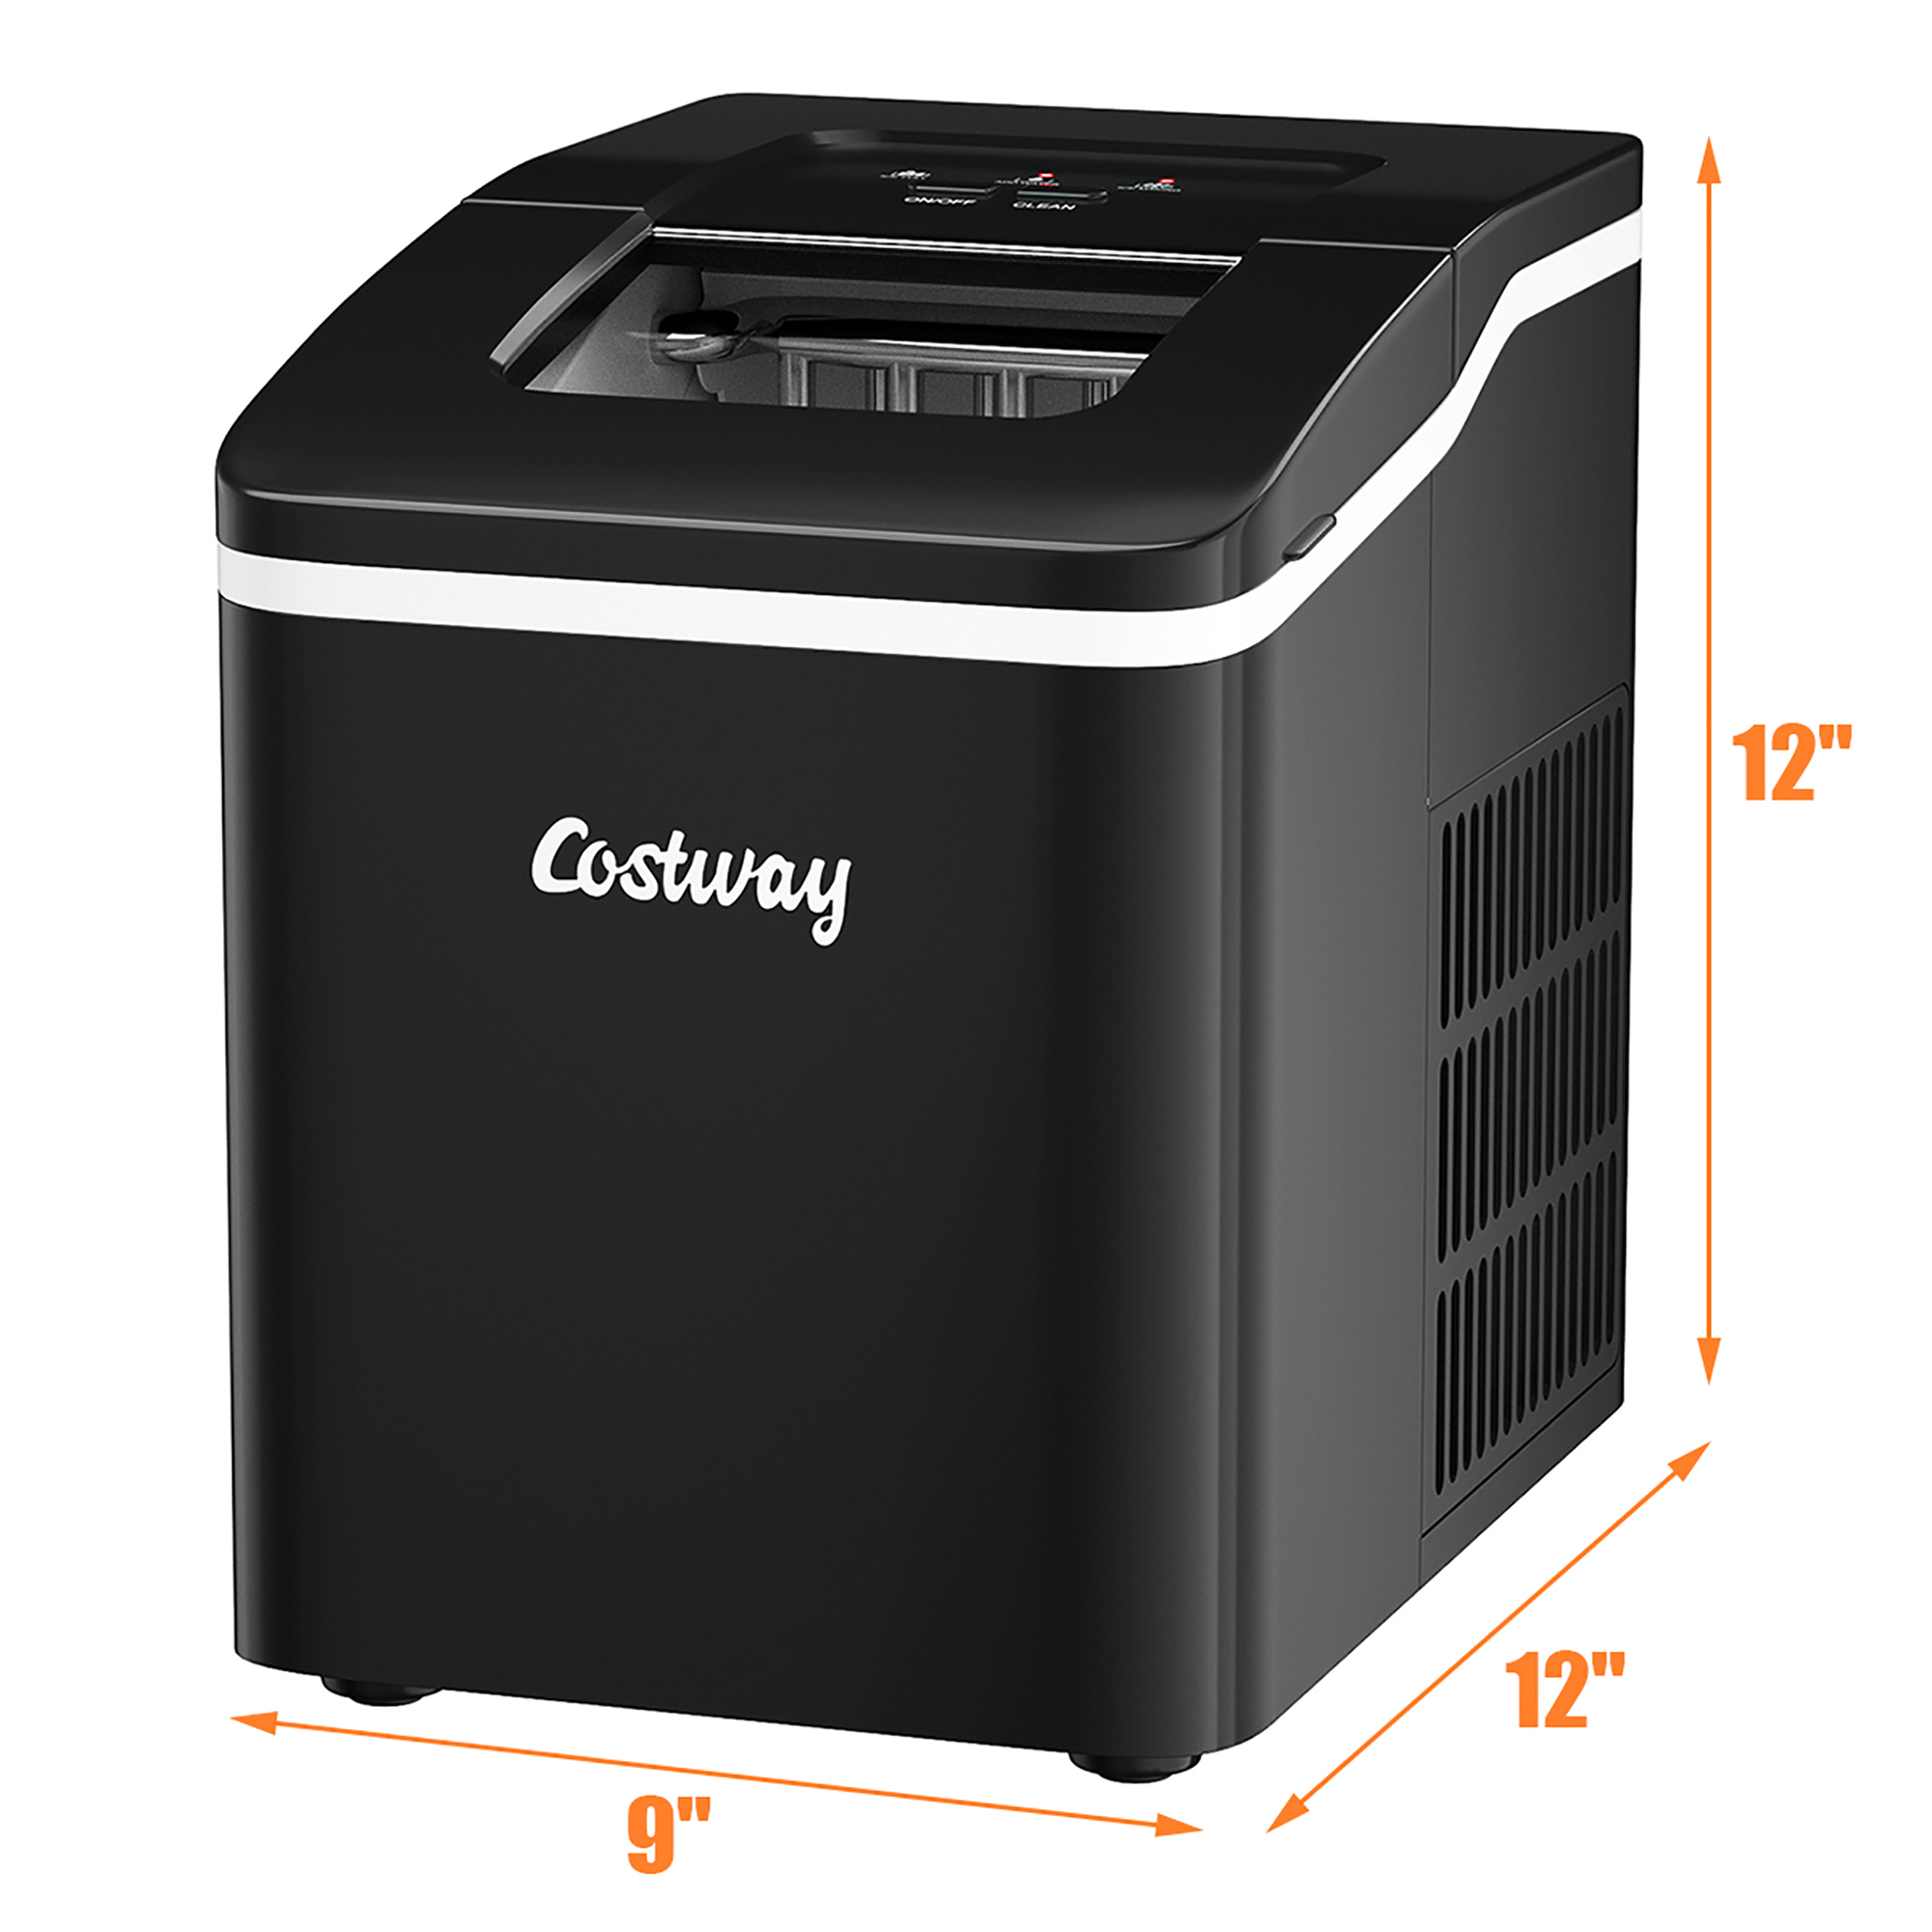 Costway Portable Ice Maker Machine Countertop 26Lbs/24H Self-cleaning w/ Scoop Black - image 6 of 10